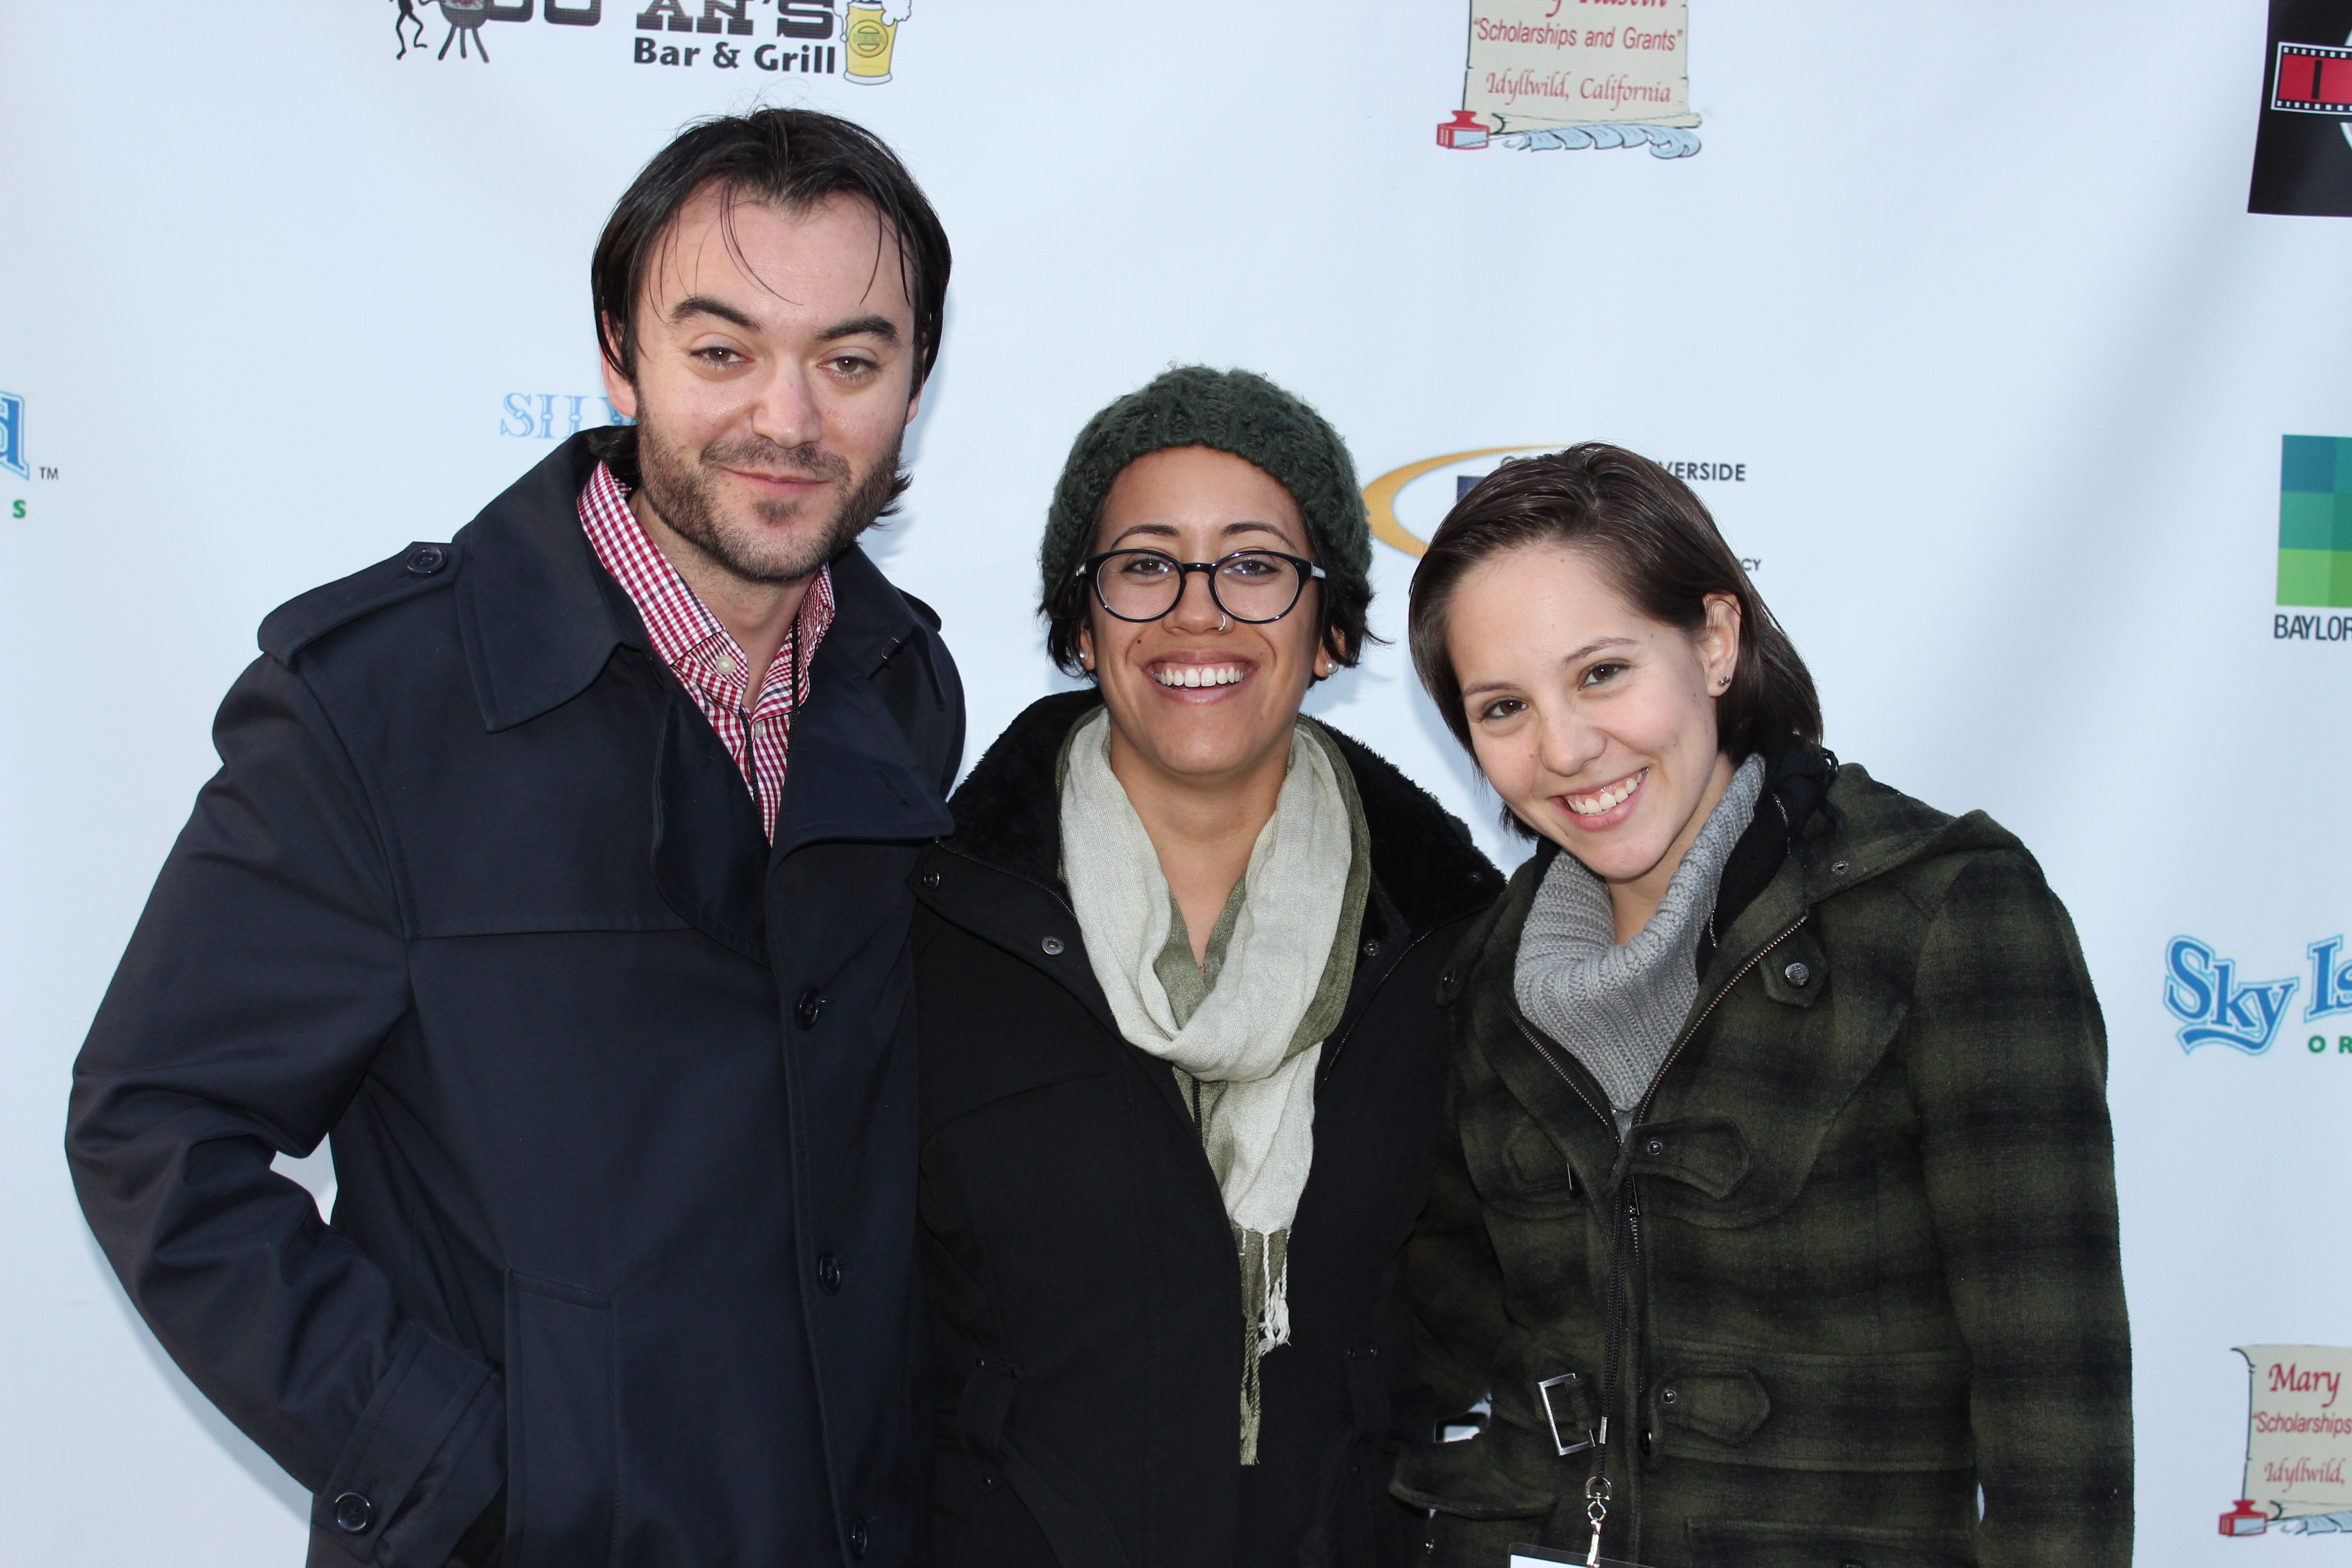 Chris Levine, Zhandra Reyes and Mellanie Urquiza at The Blind Date screening at the Idyllwild International Festival of Cinema.